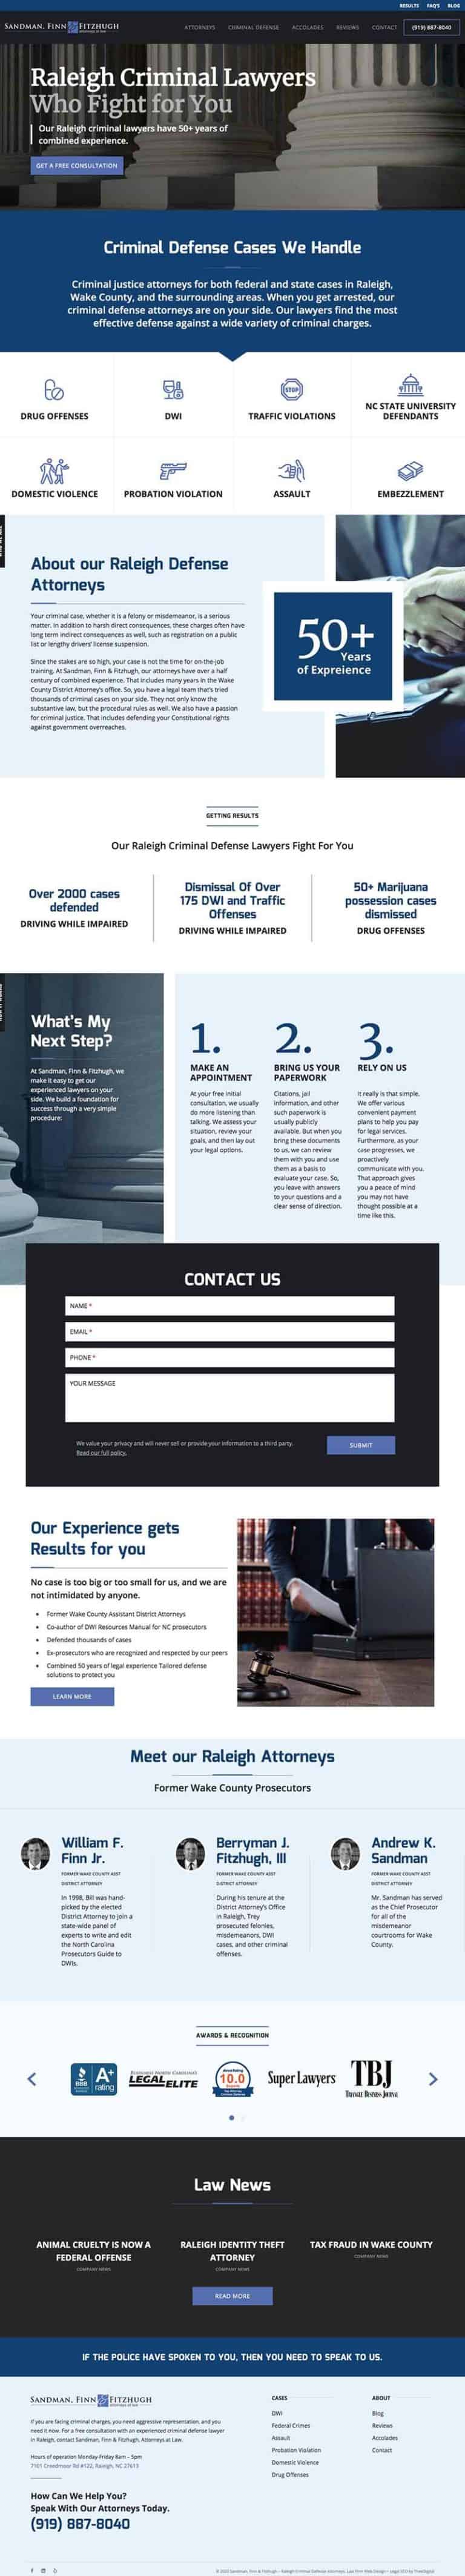 Custom WordPress site for Attorneys at Law